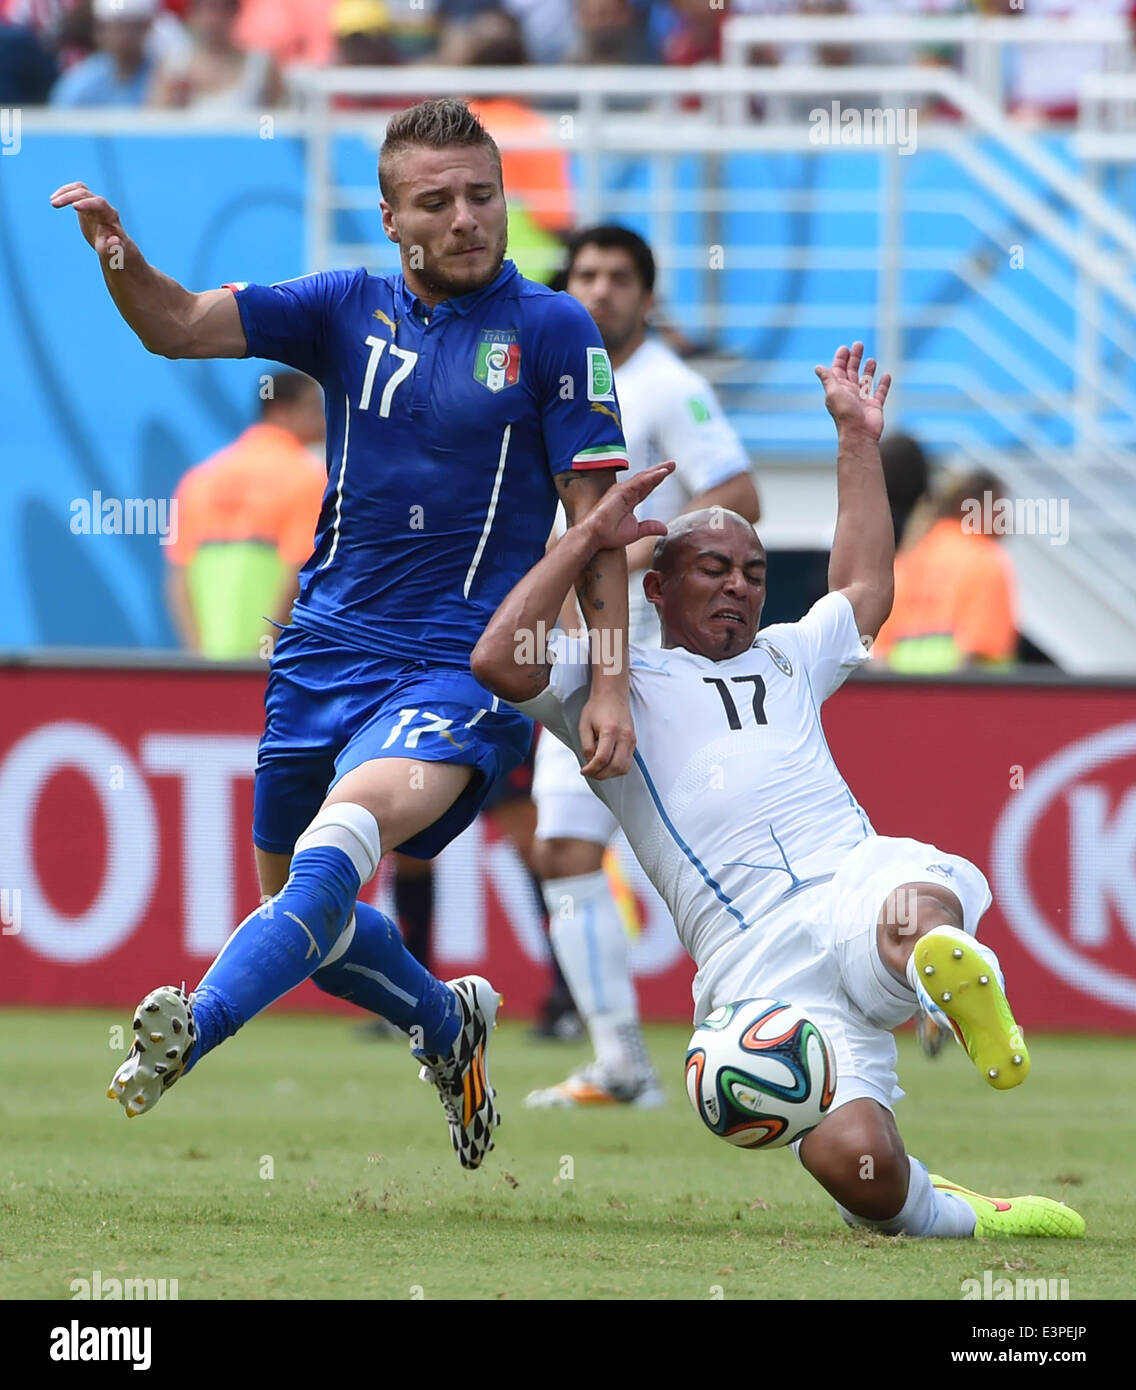 Natal, Brazil. 24th June, 2014. Italy's Ciro Immobile vies for the ball with Uruguay's Egidio Arevalo Rios during a Group D match between Italy and Uruguay of 2014 FIFA World Cup at the Estadio das Dunas Stadium in Natal, Brazil, June 24, 2014. © Guo Yong/Xinhua/Alamy Live News Stock Photo